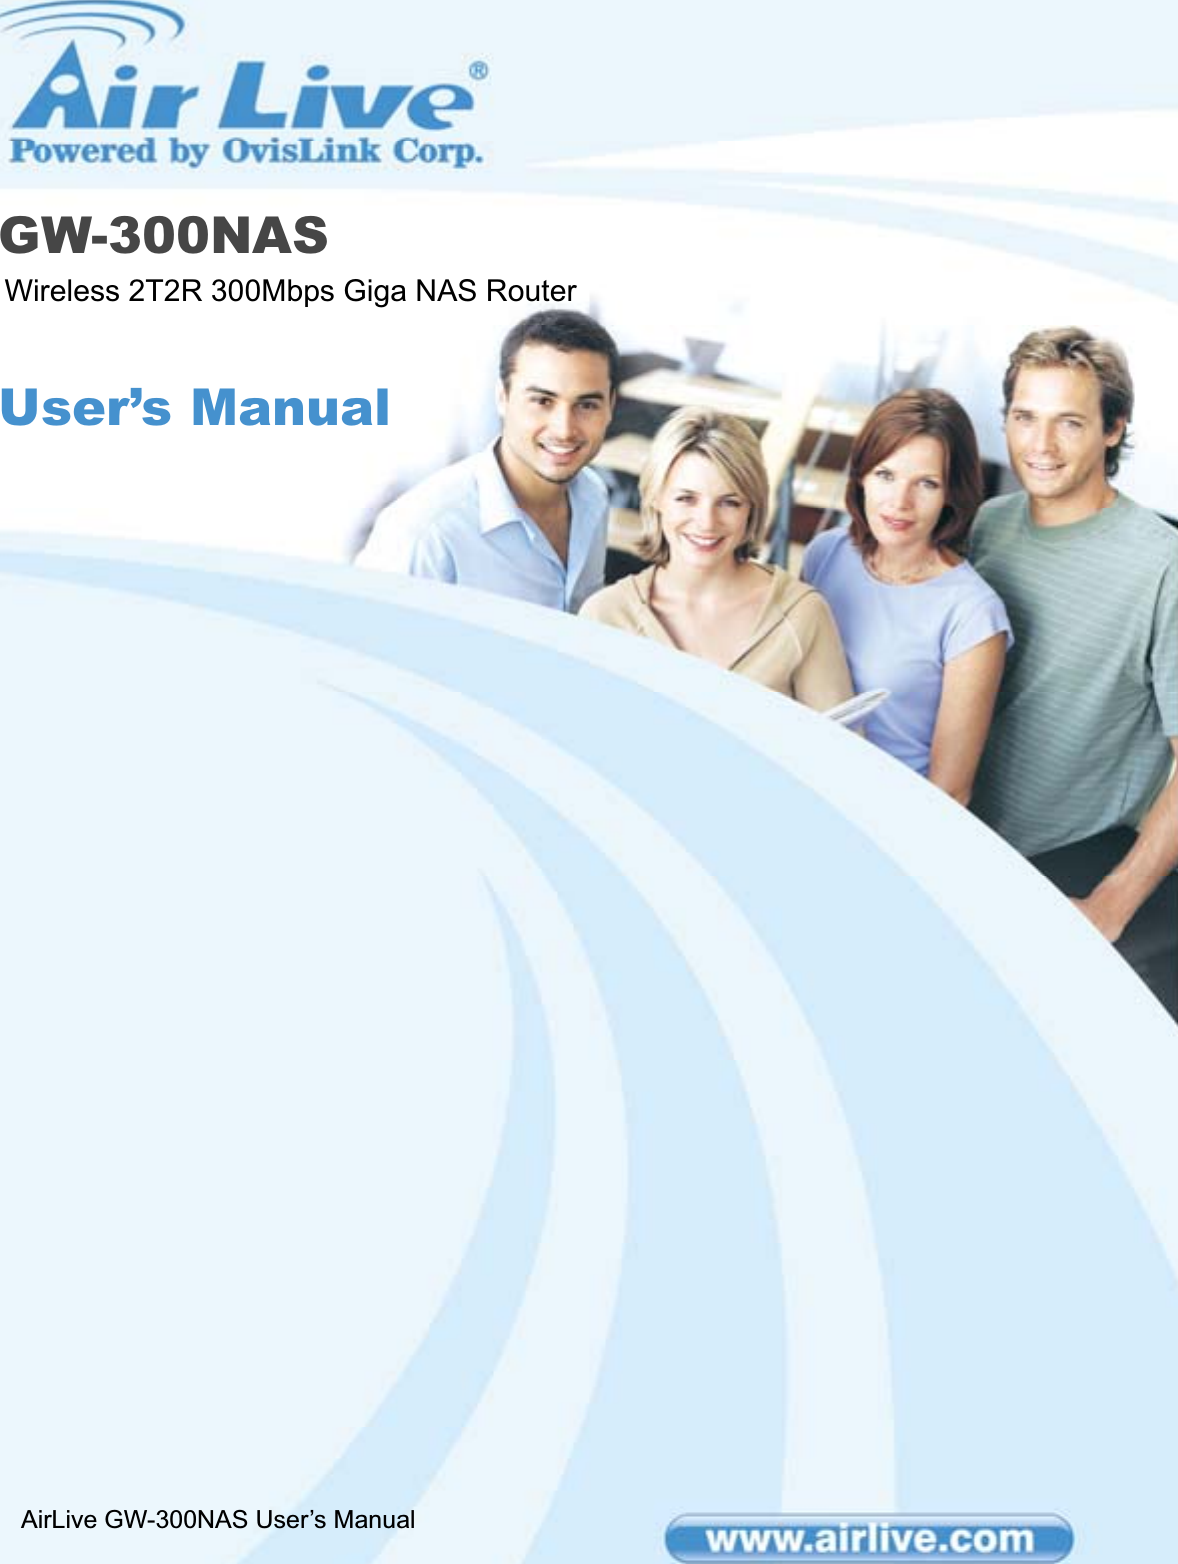                                            AirLive GW-300NAS User’s ManualGW-300NAS Wireless 2T2R 300Mbps Giga NAS Router User’s Manual 